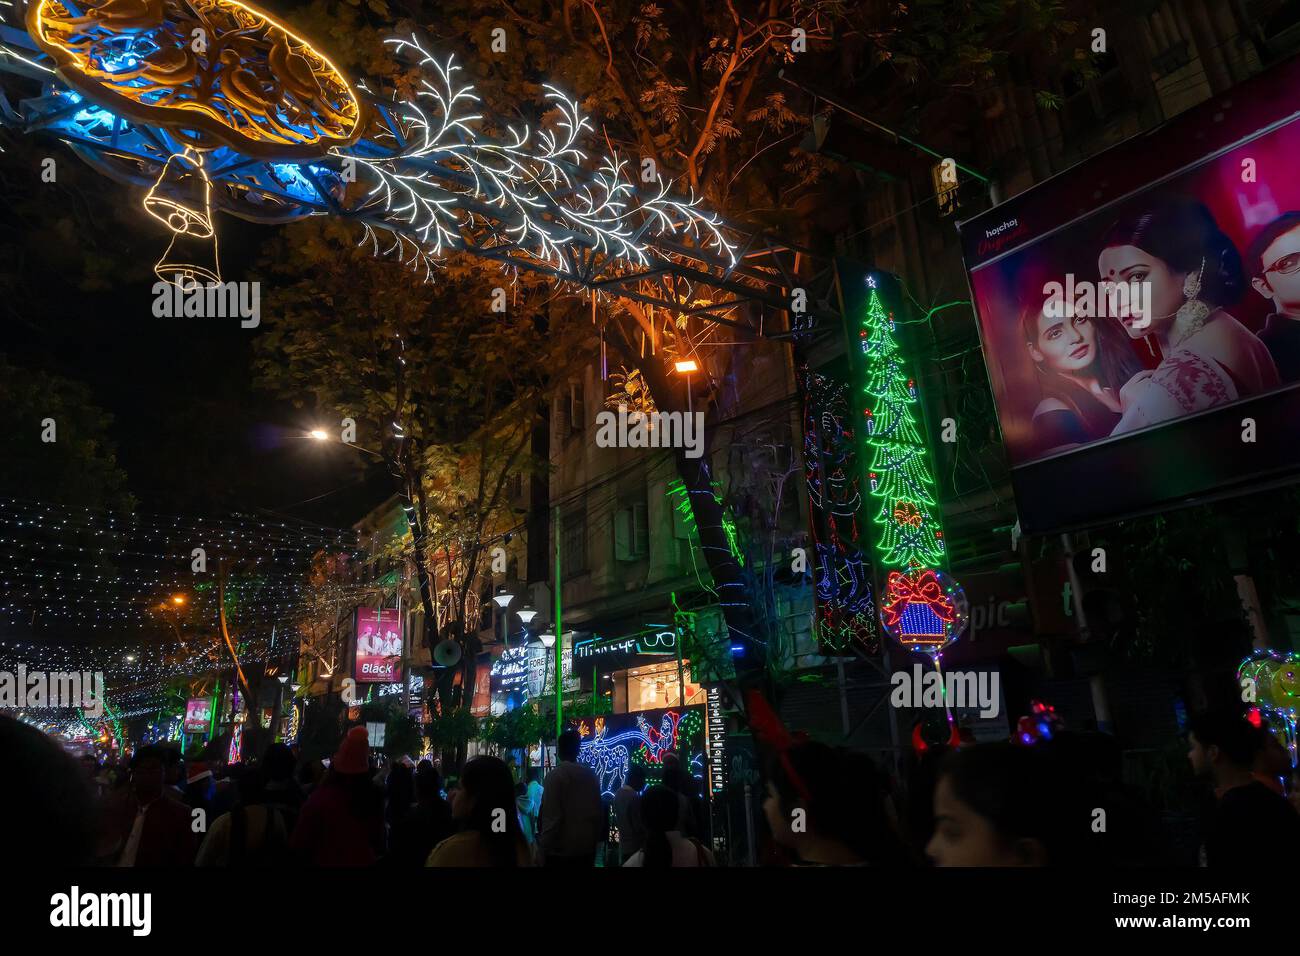 Kolkata, West Bengal, India - 25.12.2018 : Christmas celebration by enthusiastic young public at illuminated and decorated park street with lights. Stock Photo